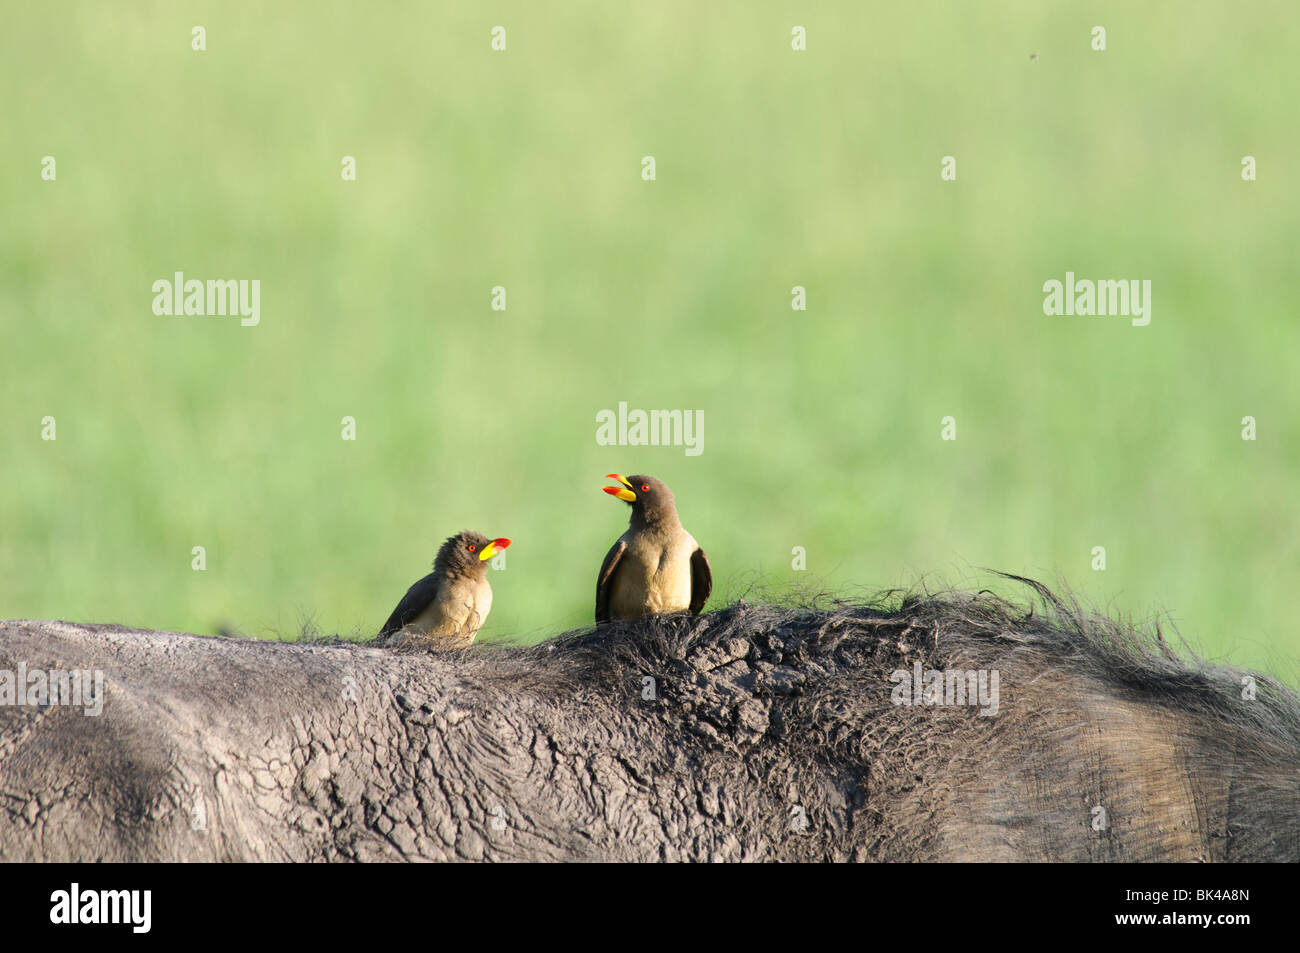 Two Yellow-billed Oxpeckers Buphagus africanus in conversation, standing on Buffalo's back Stock Photo